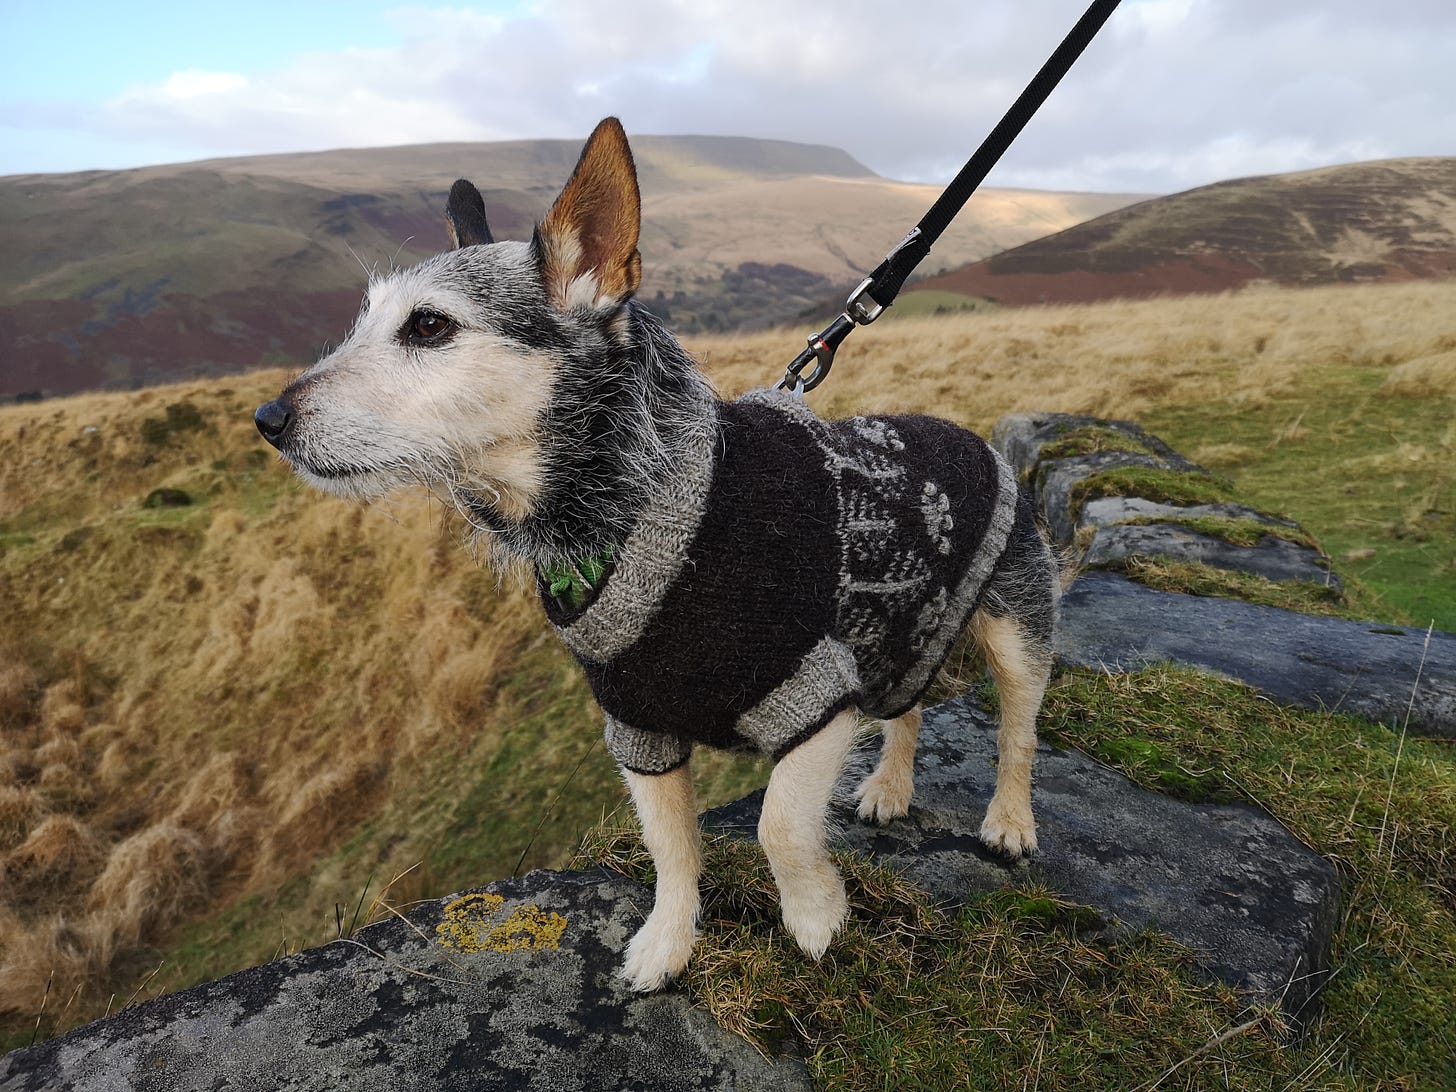 Jack the scruffy terrier stands on a rock, high above the valley and with a mountain view in the background. He's wearing a black and grey handknitted jumper and looking uncannily handsome.